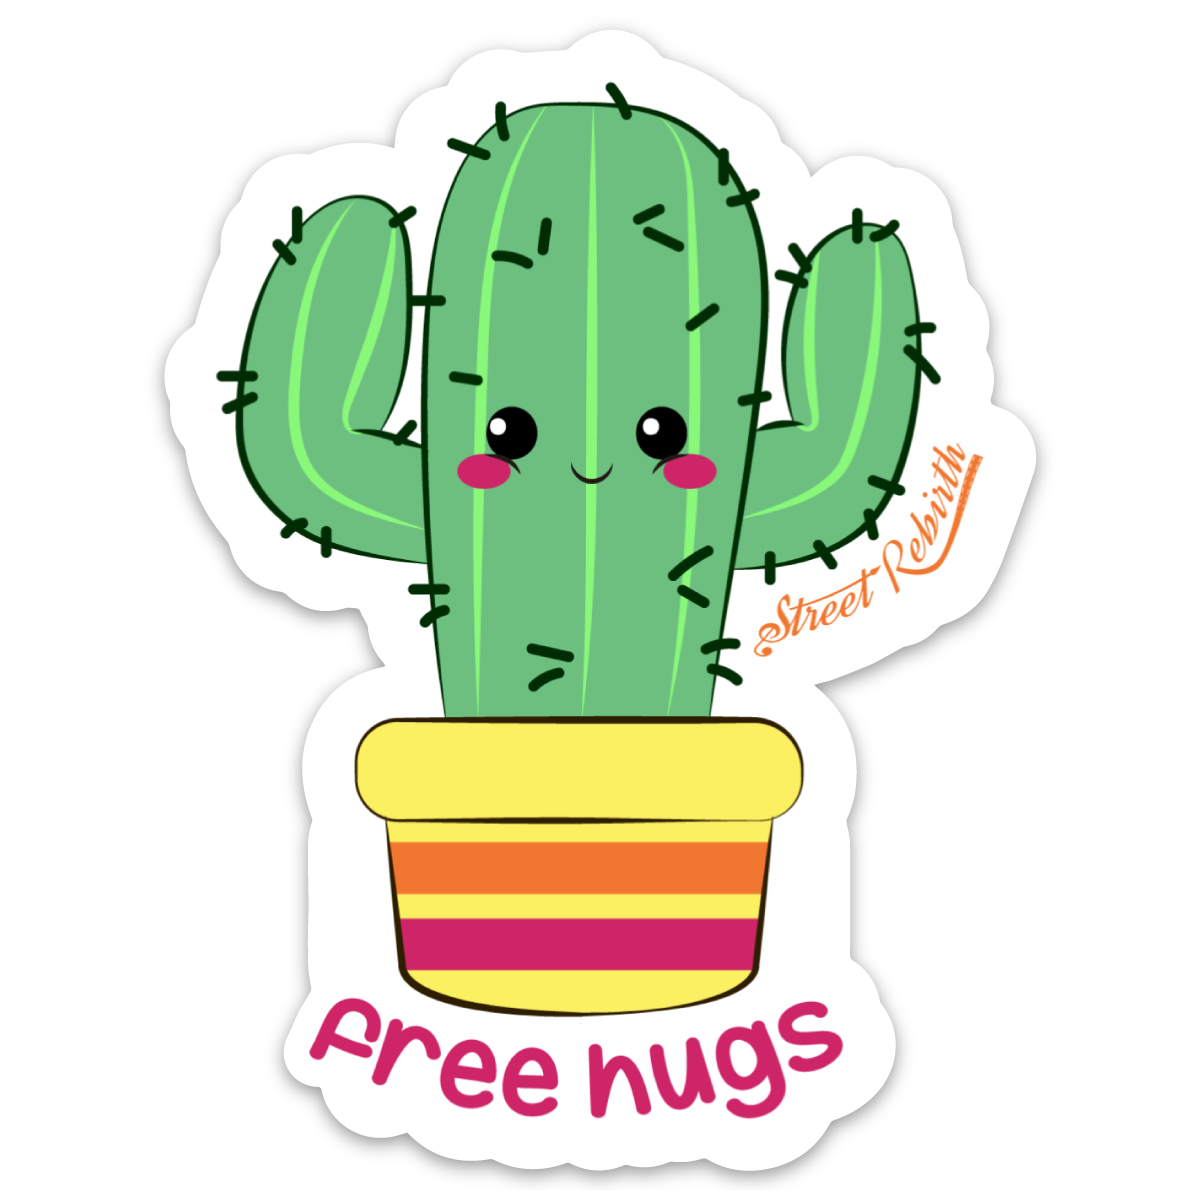 FREE HUGS STICKER – ONE 4 INCH WATER PROOF VINYL STICKER – FOR HYDRO FLASK, SKATEBOARD, LAPTOP, PLANNER, CAR, COLLECTING, GIFTING